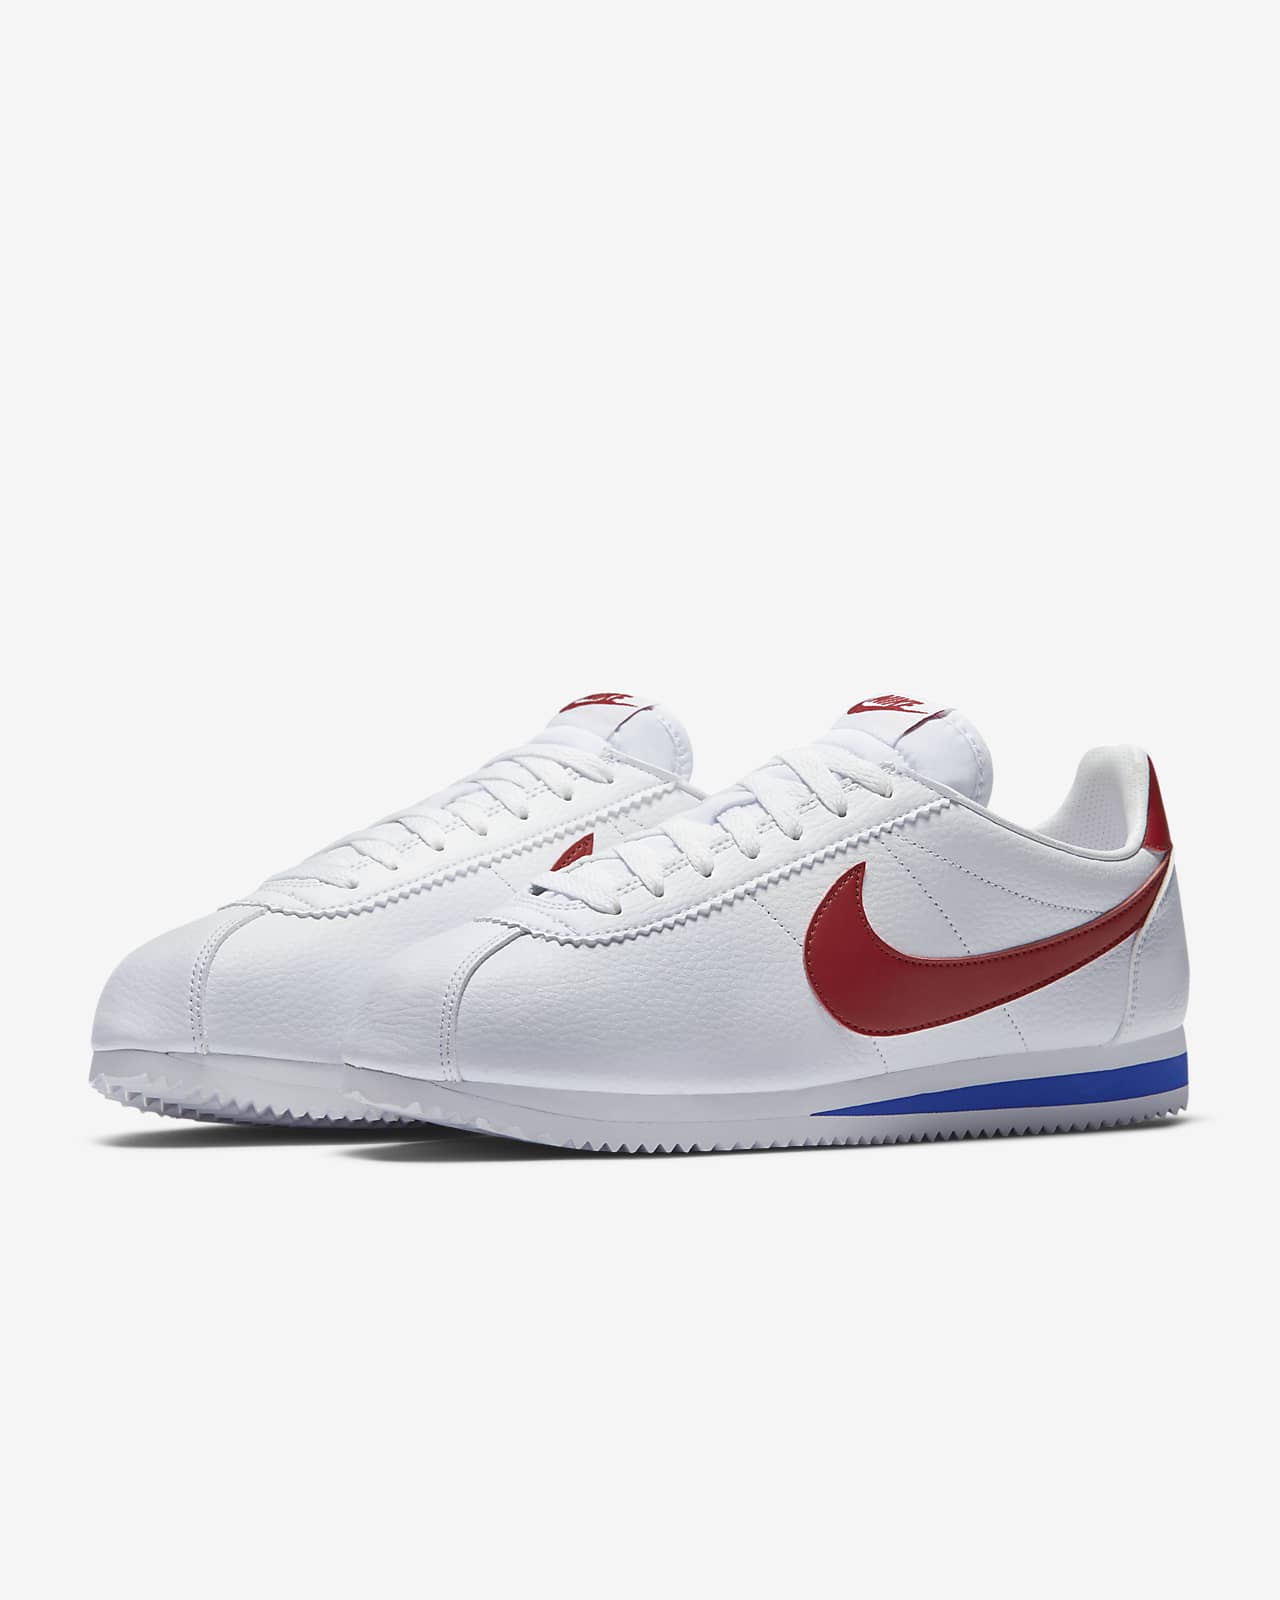 nike cortez for sale philippines